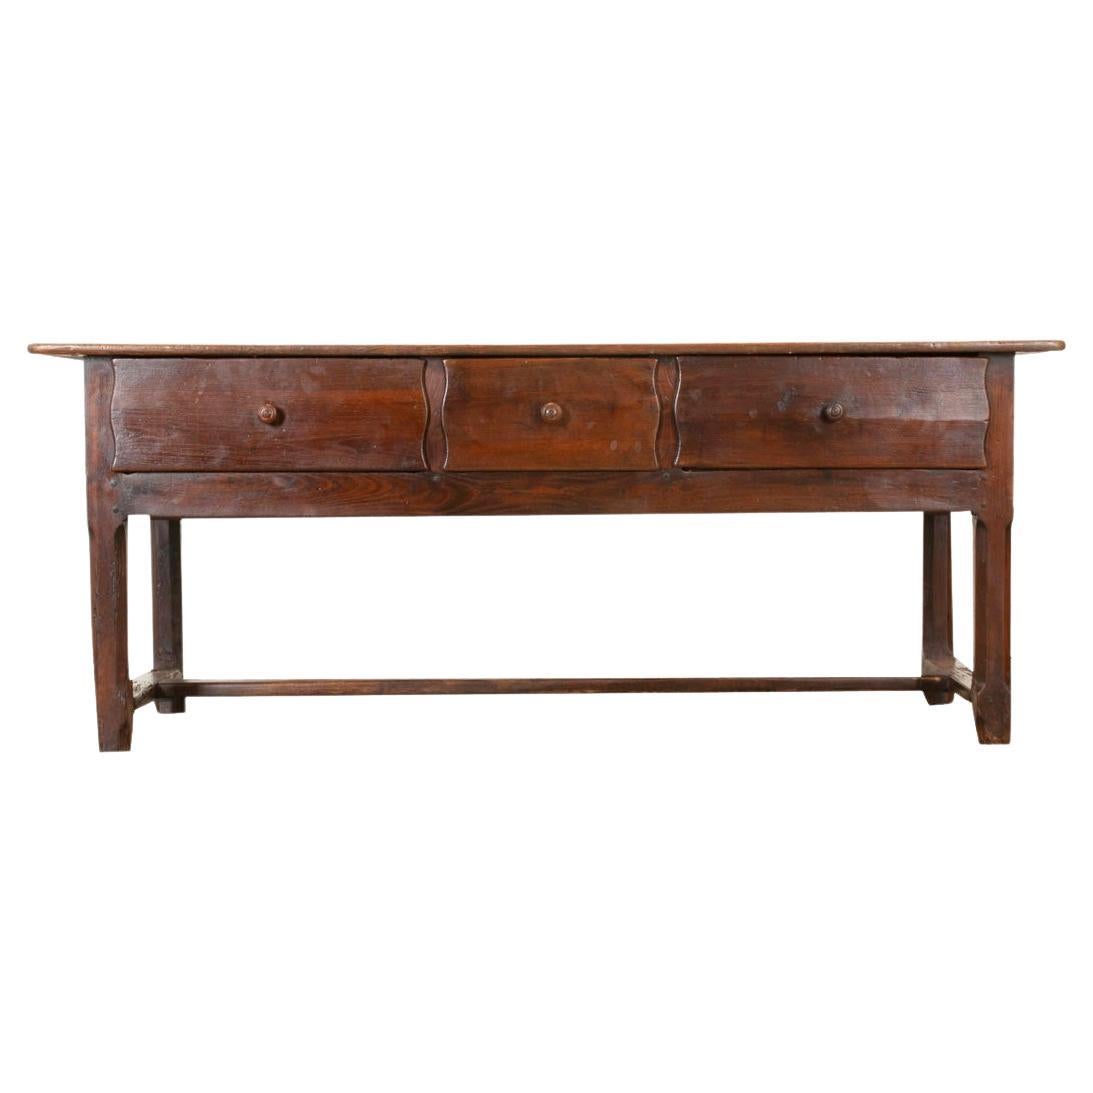 Early 19th Century Chestnut Server For Sale